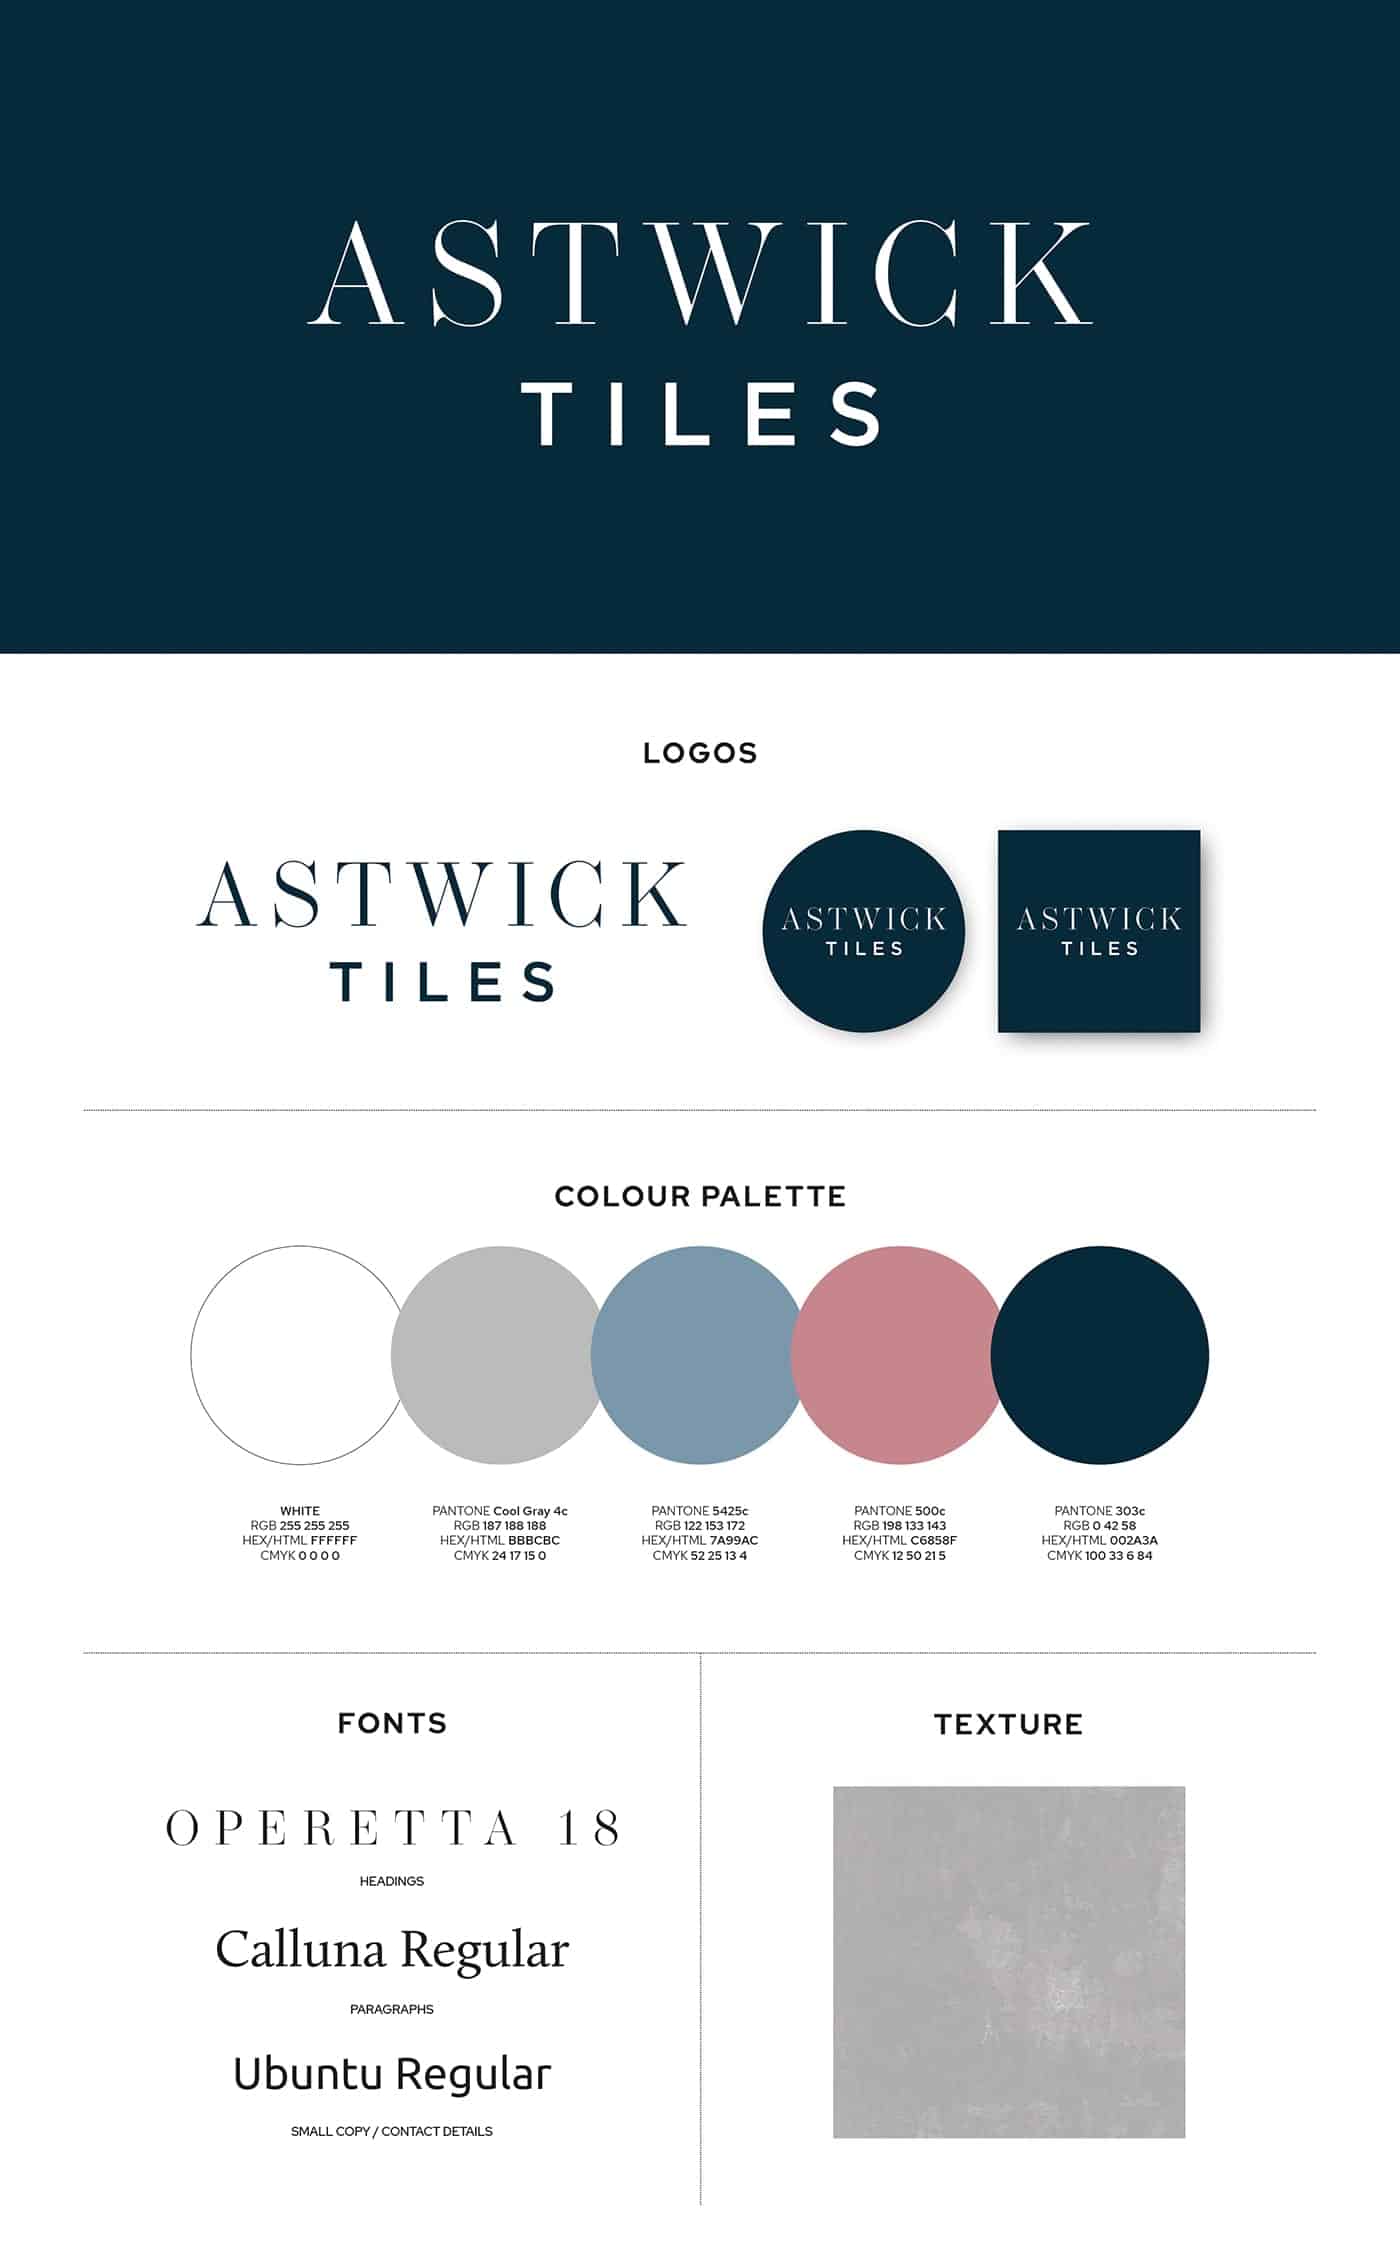 astwick tiles branding guidelines document layout